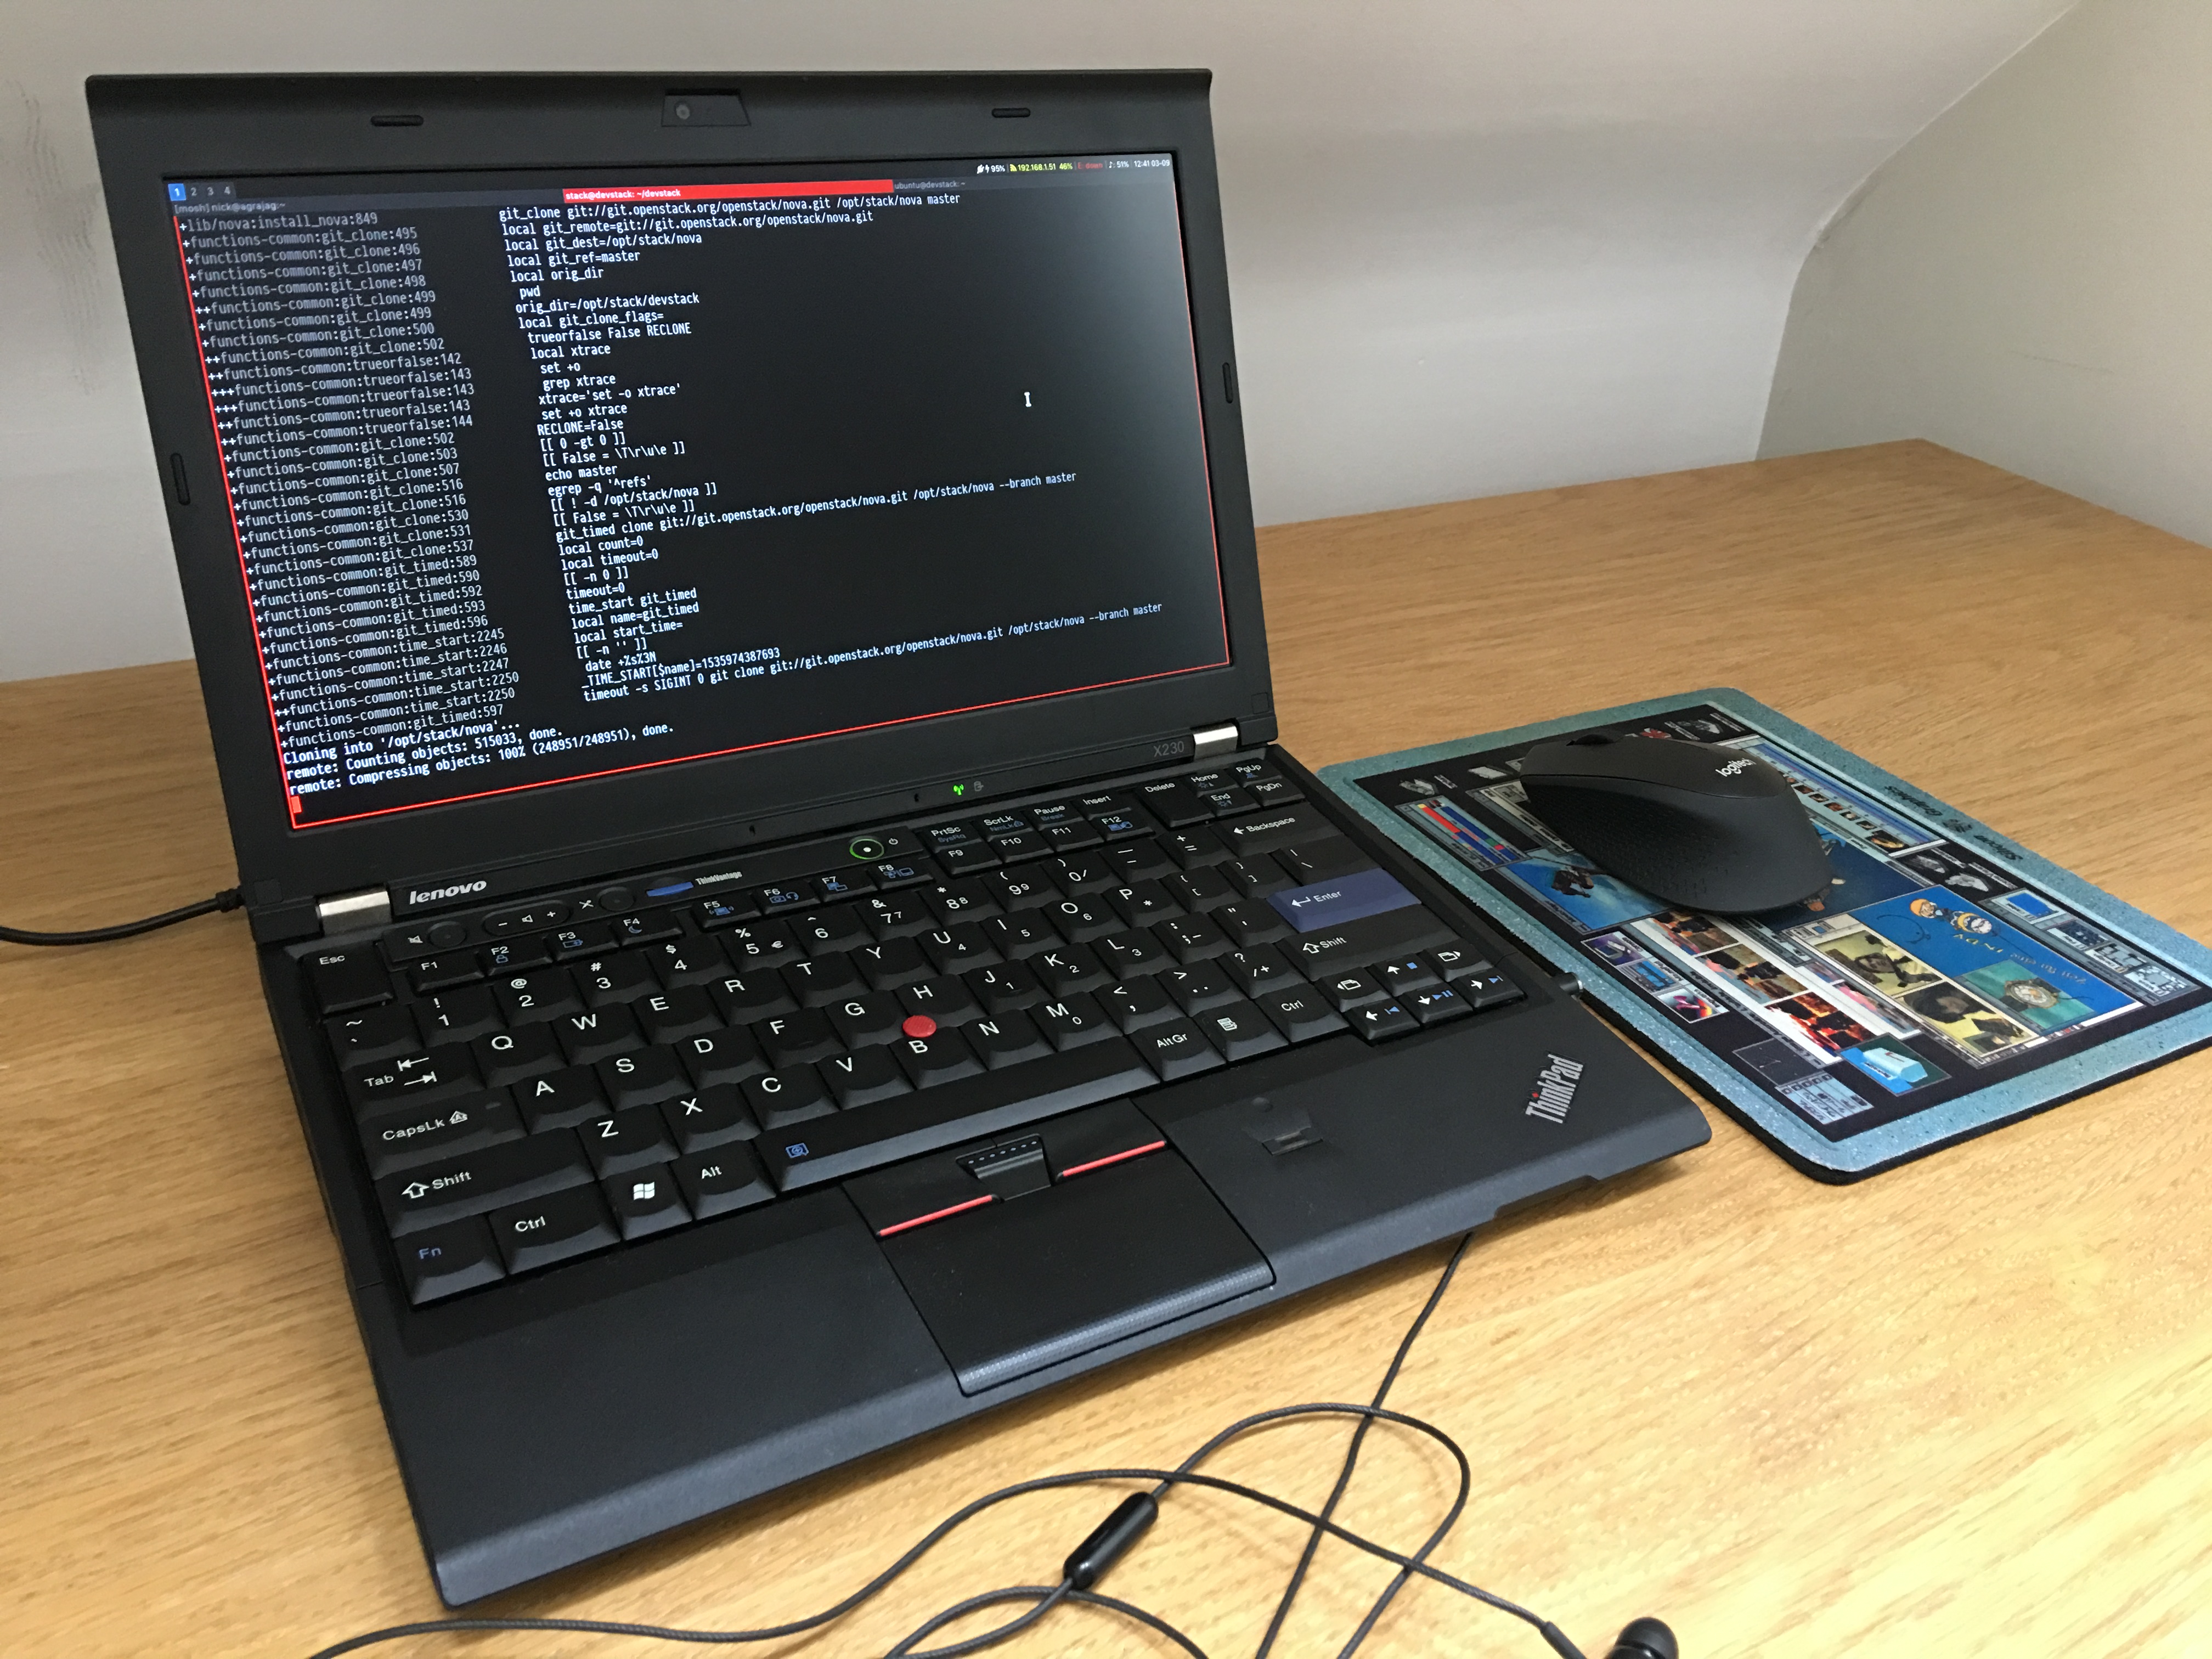 The X230 in action